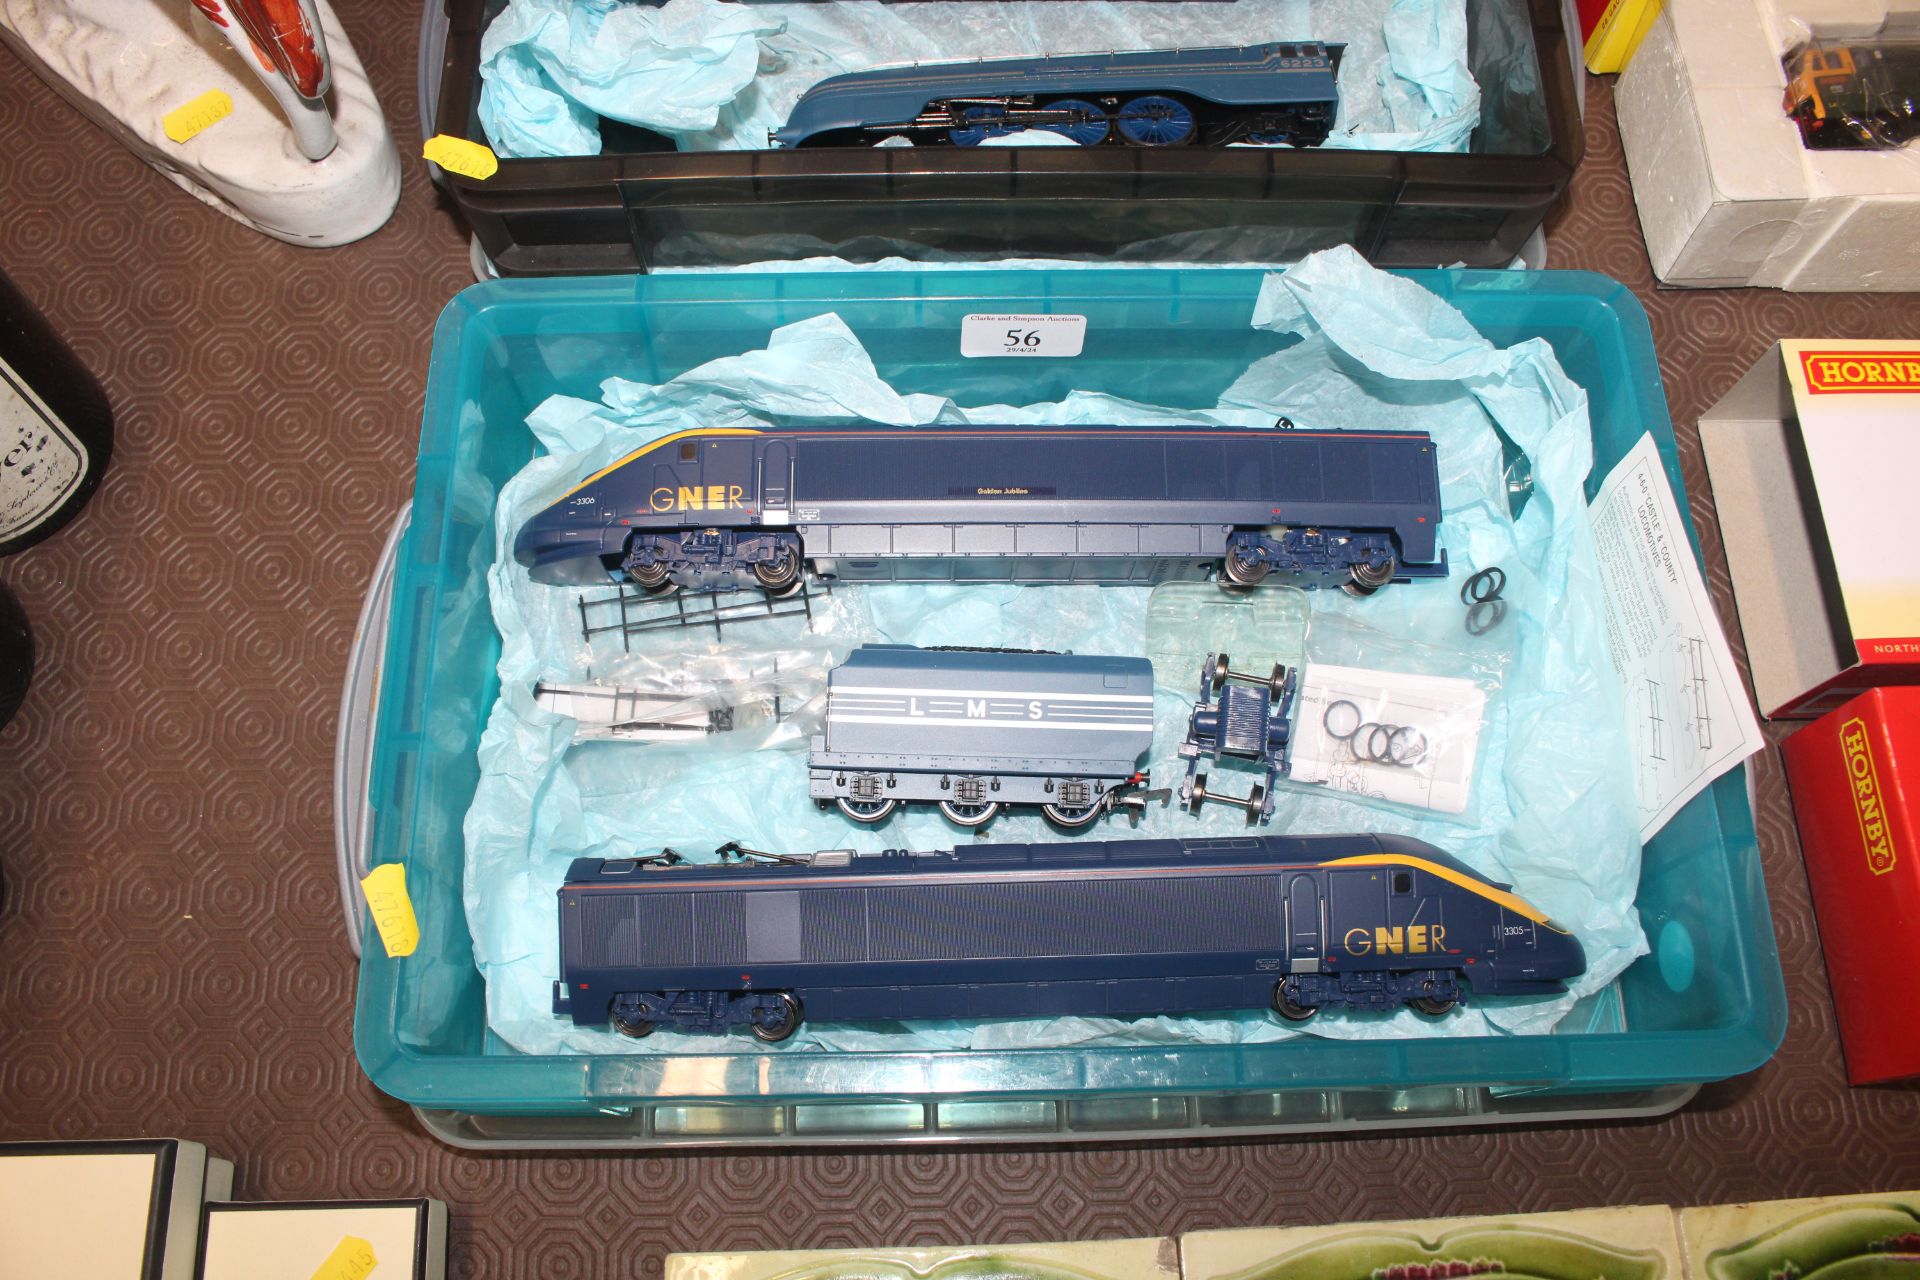 Two Hornby GNER 3306 locomotives; and carriages; and a LMS 6223 locomotive "Princess Alice" and